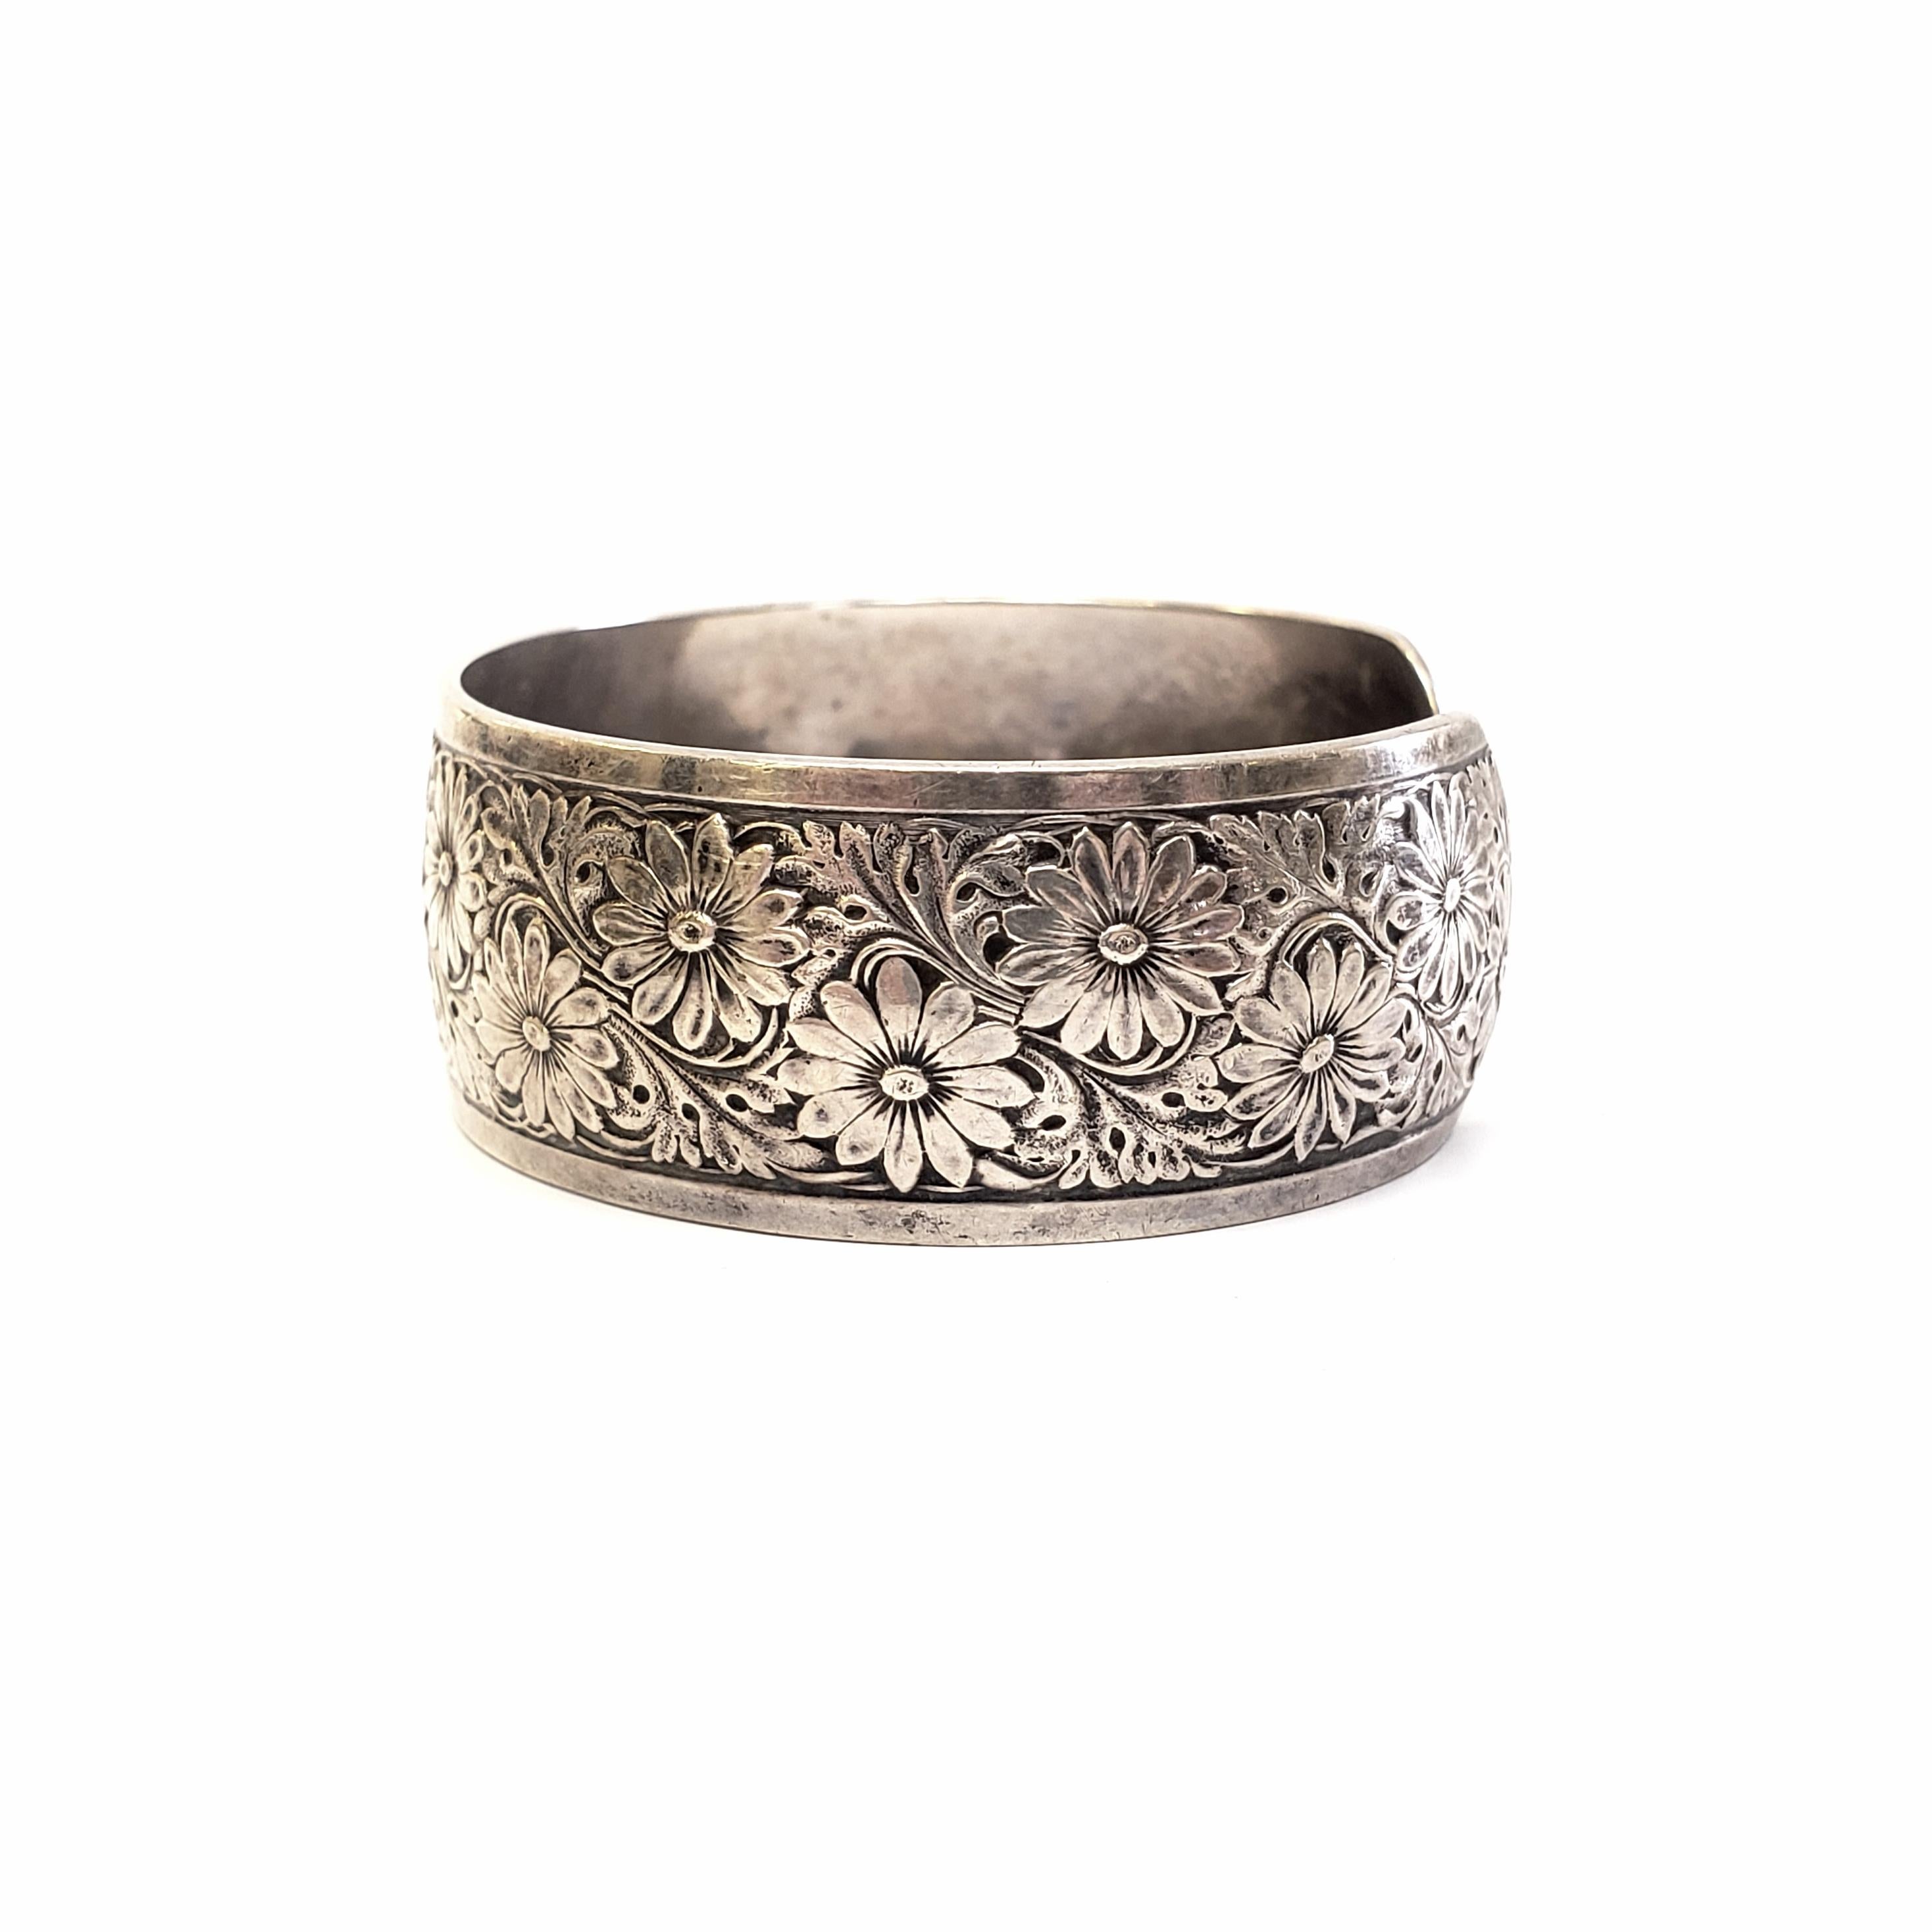 Sterling silver cuff bracelet designed by Charles Thomae.

Charles Thomae of Attleboro, MA manufactured sterling novelties from 1920. This cuff bracelet features a beautiful floral and scroll motif.

Measures 6 1/8